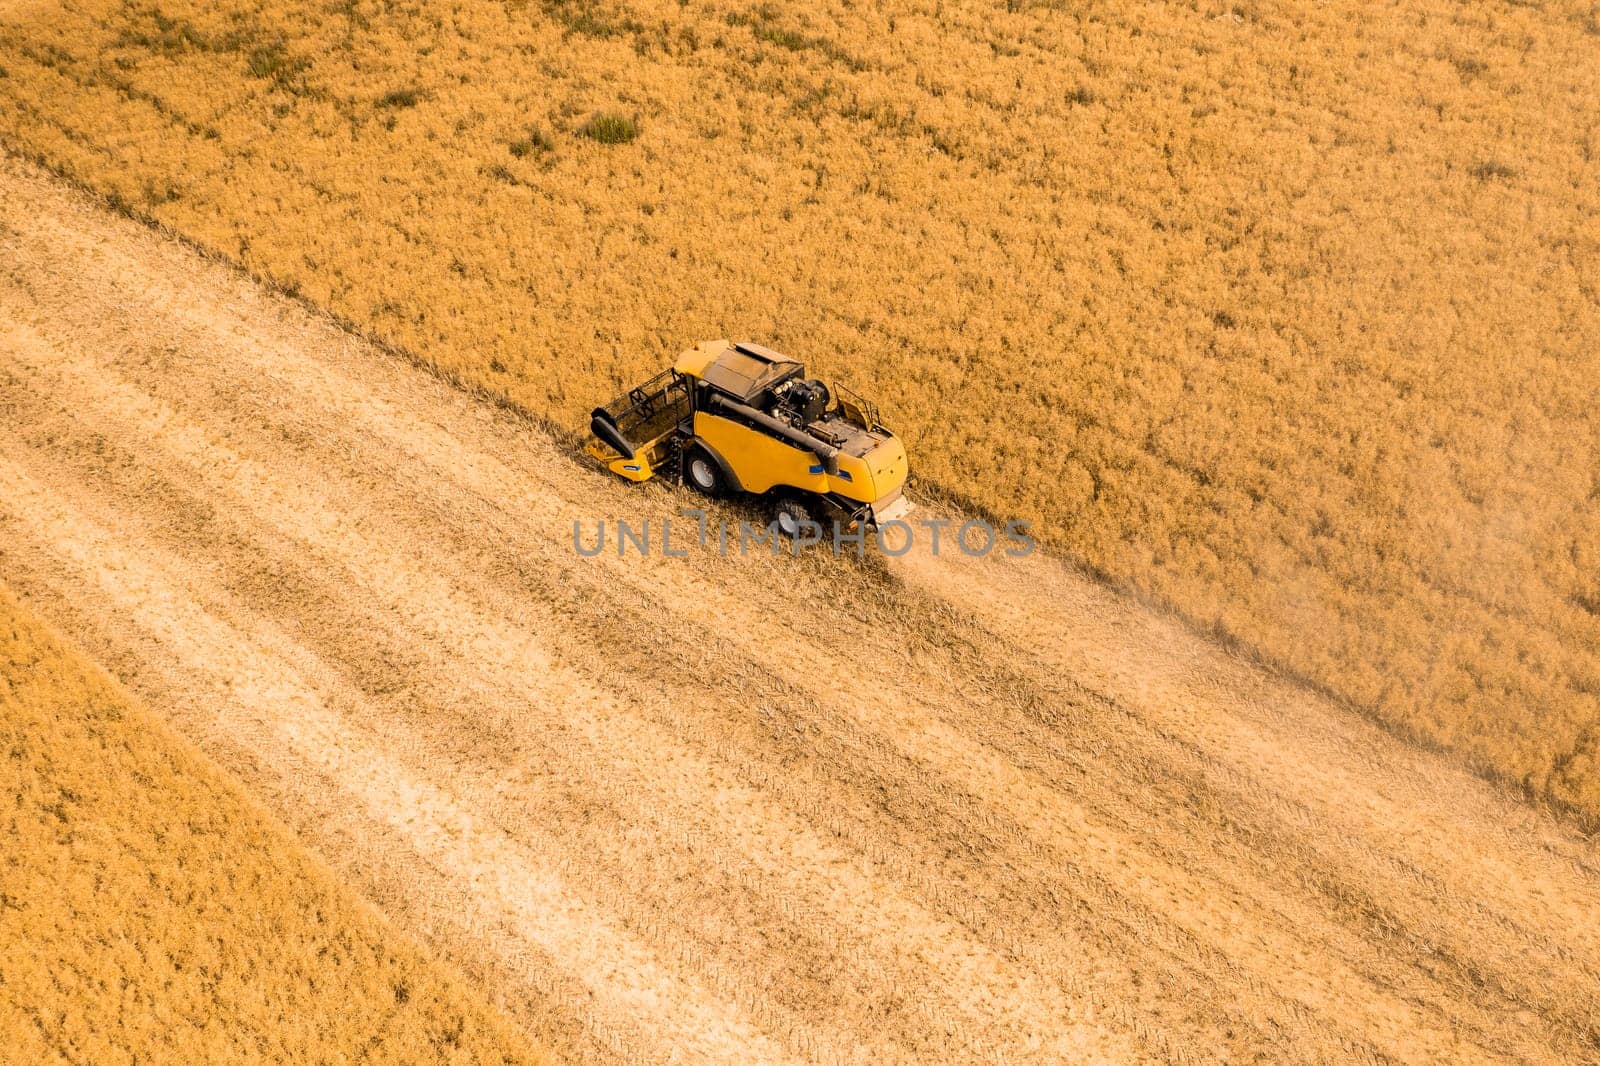 Top view of a combine harvester harvesting wheat from a field by vladimka